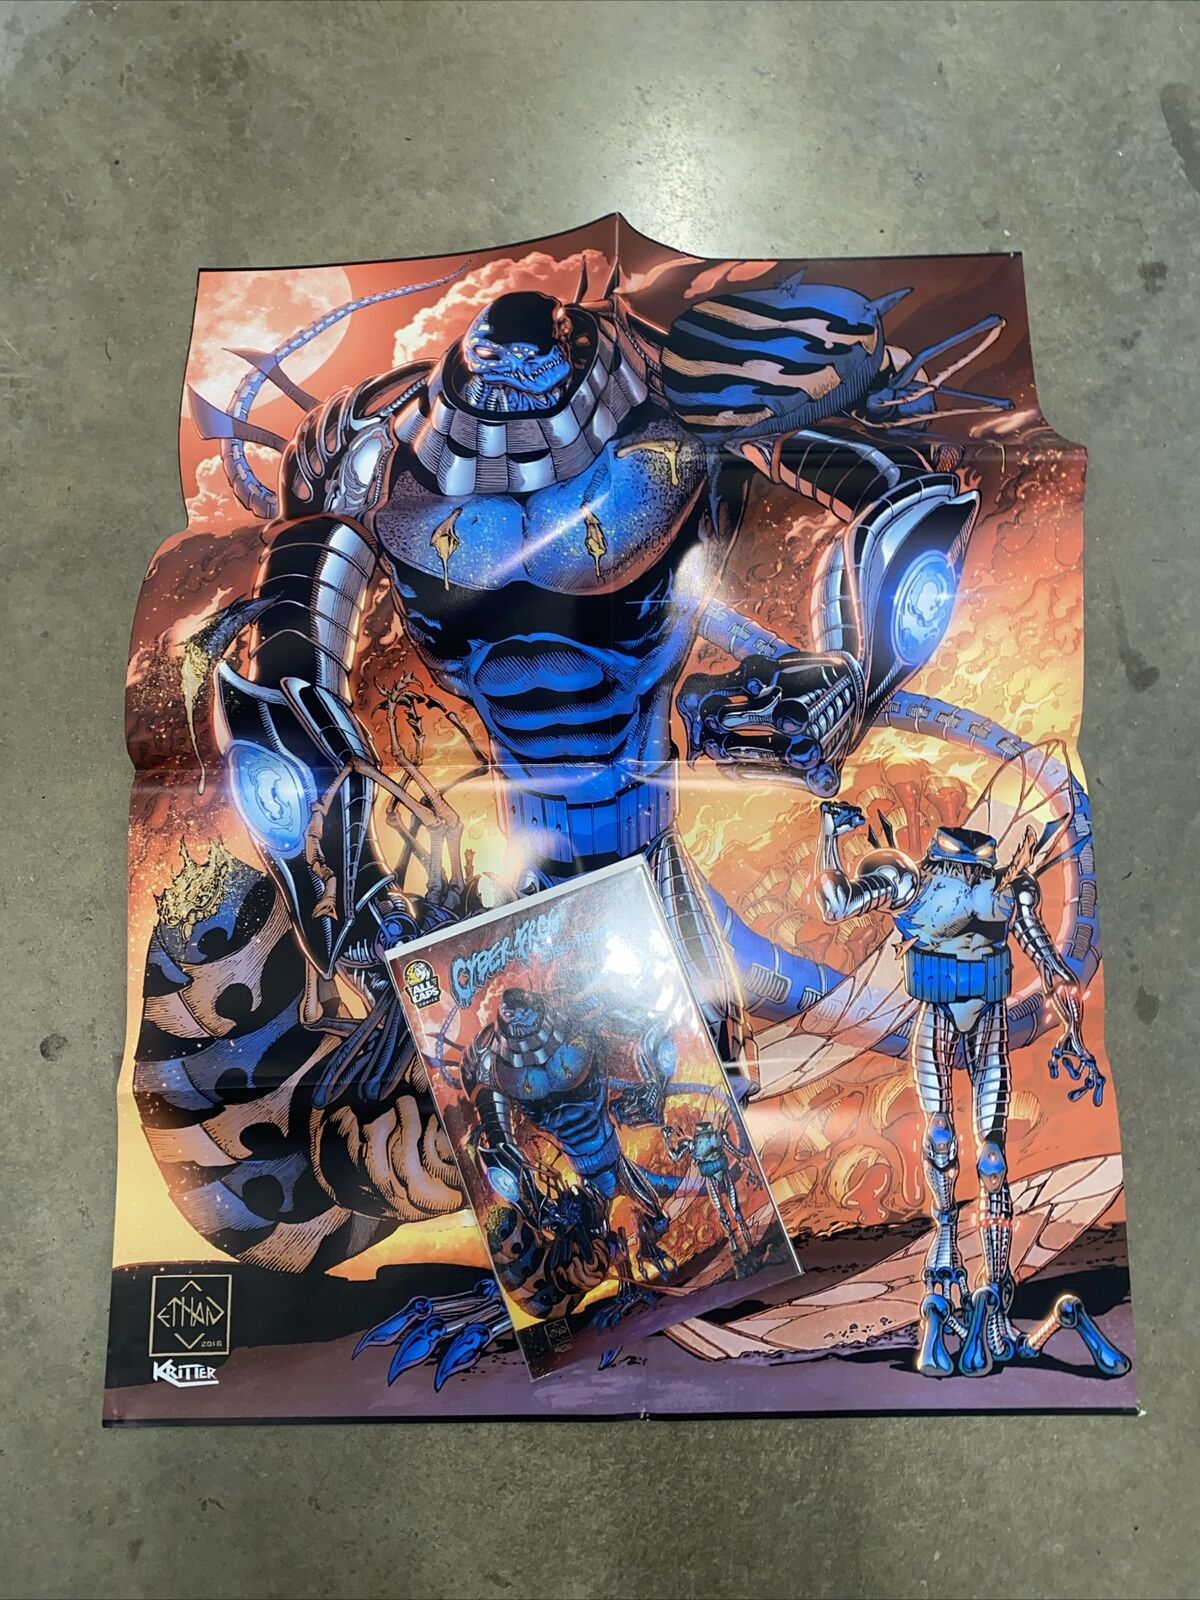 Cyberfrog Bloodhoney 1 Comic + Matching Fist Bump Cover Variant Poster